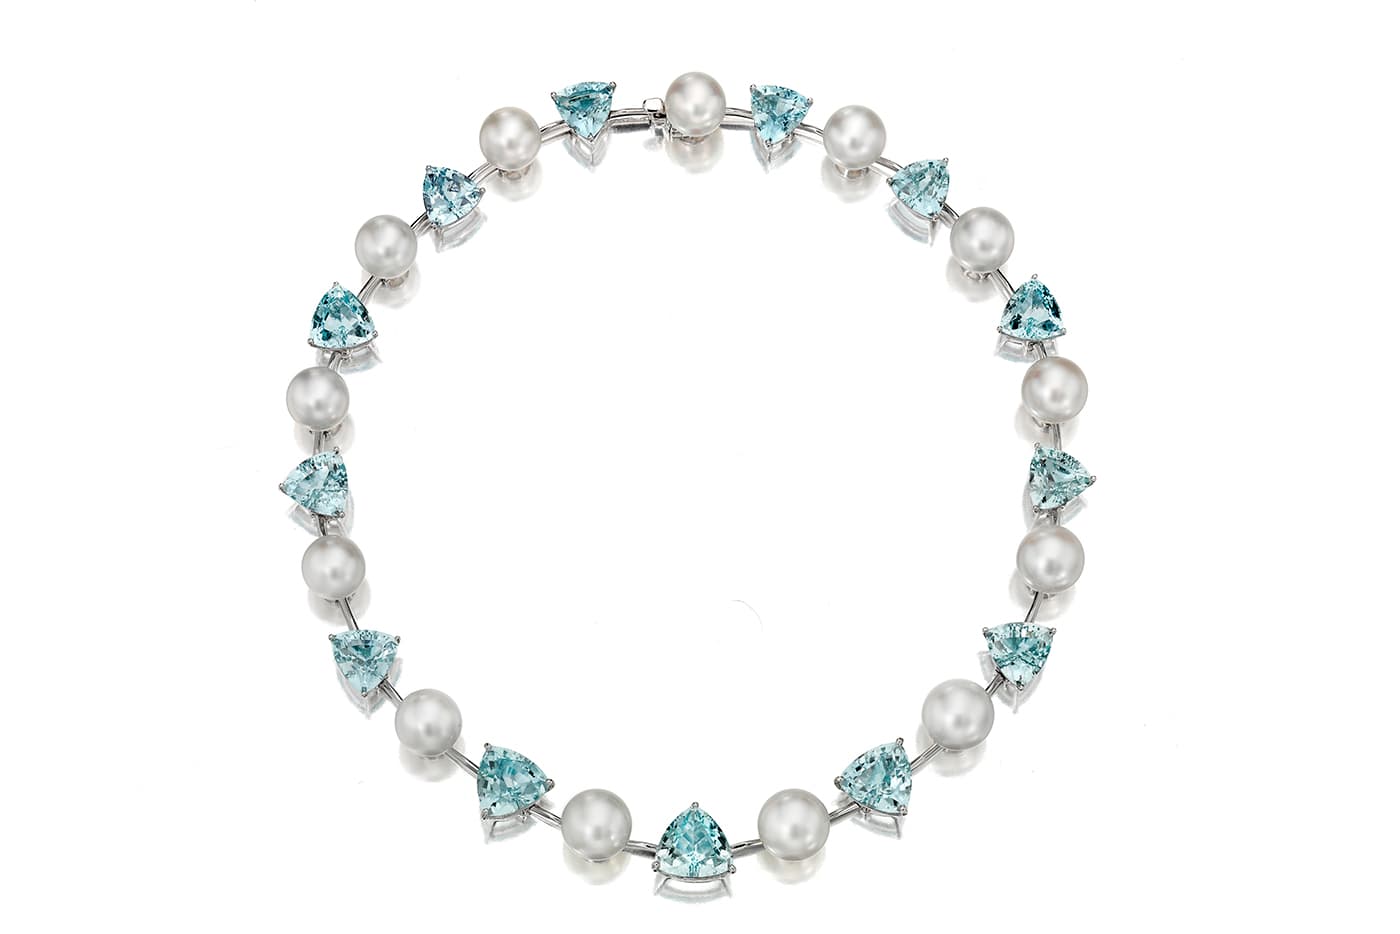 Assael showcase coloured pearls and gems in new collection